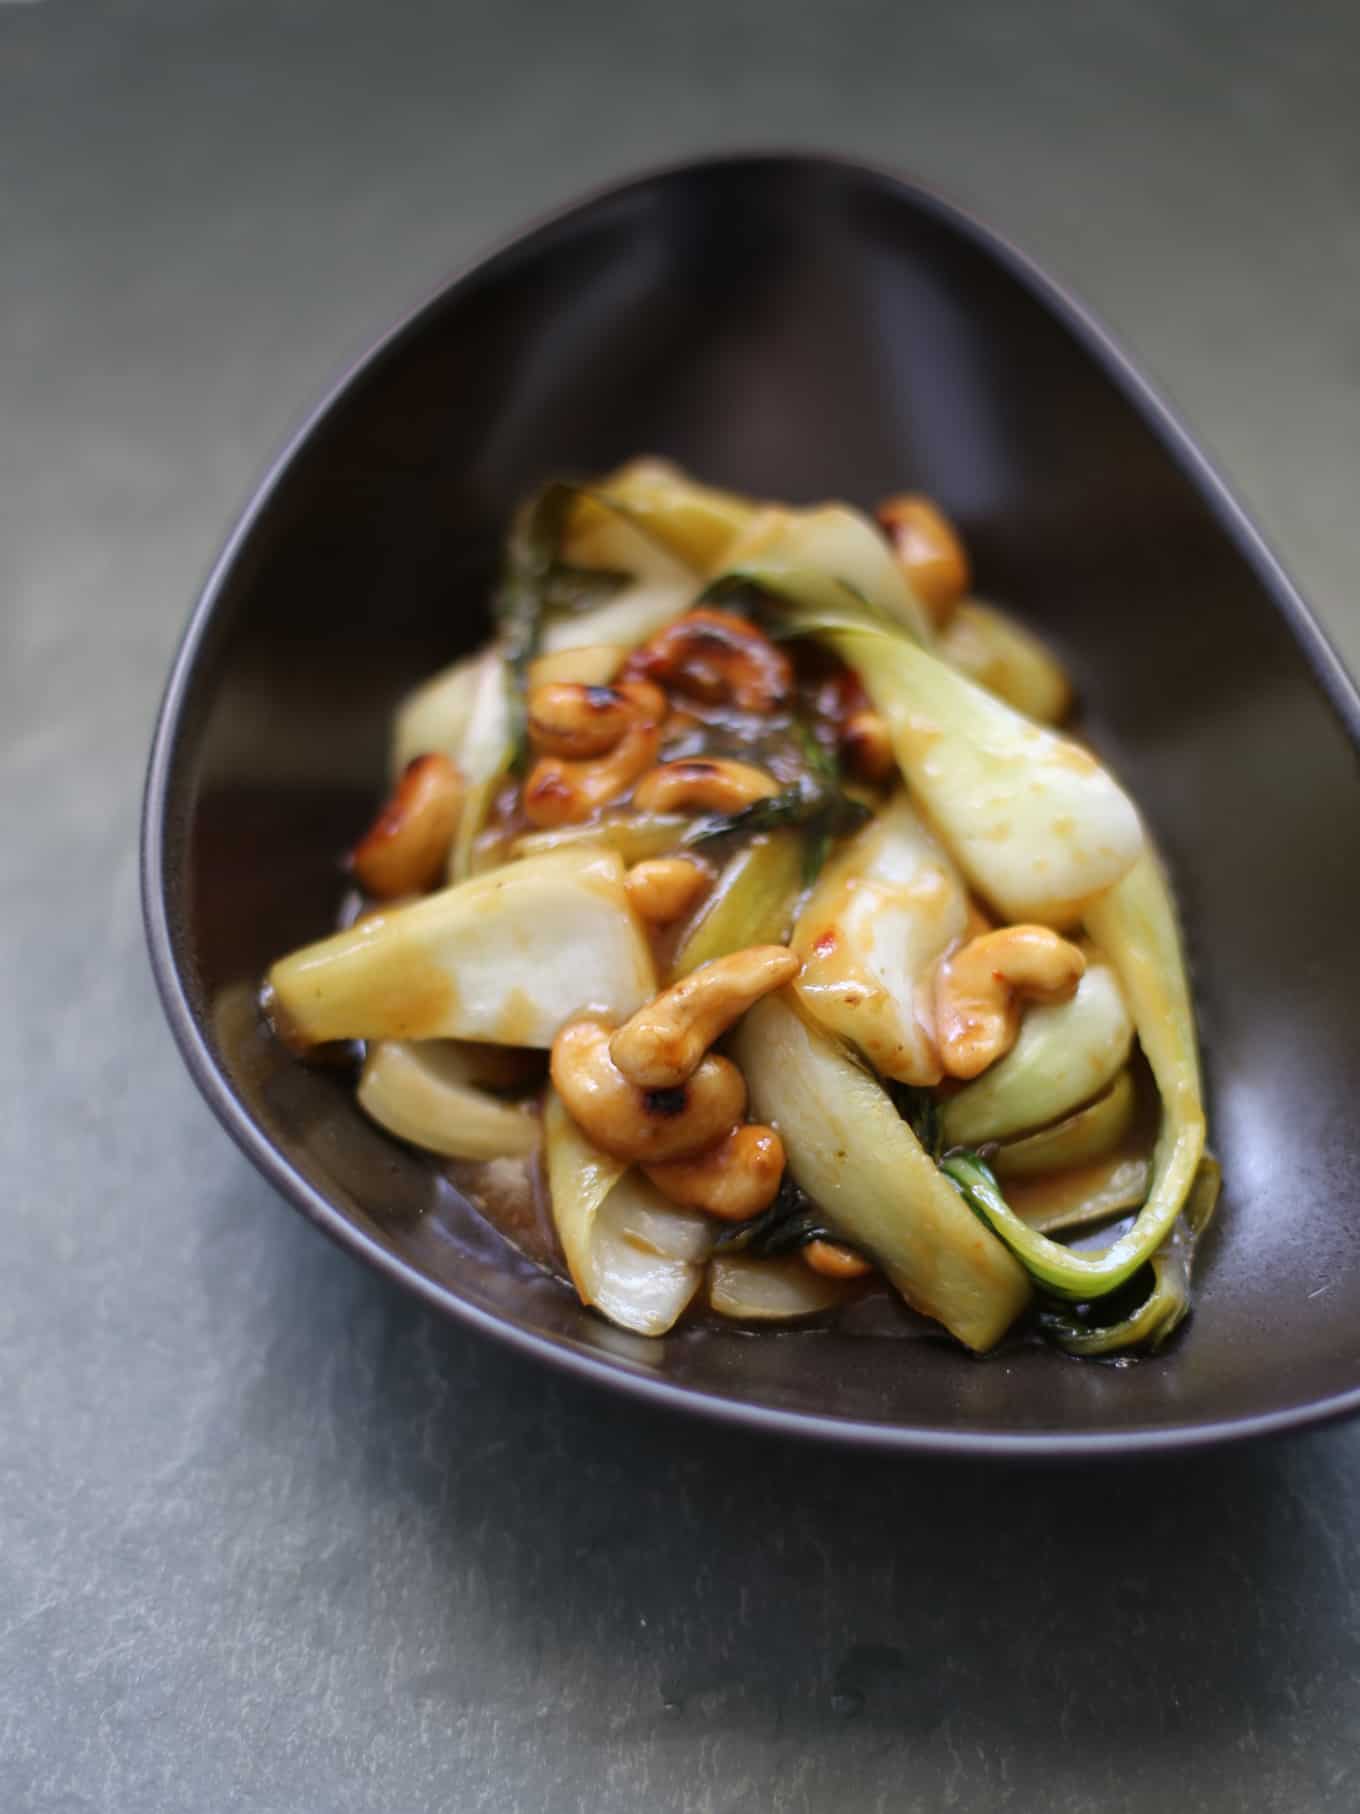 Chinese garlic sauce with bok choy and cashews in a bowl